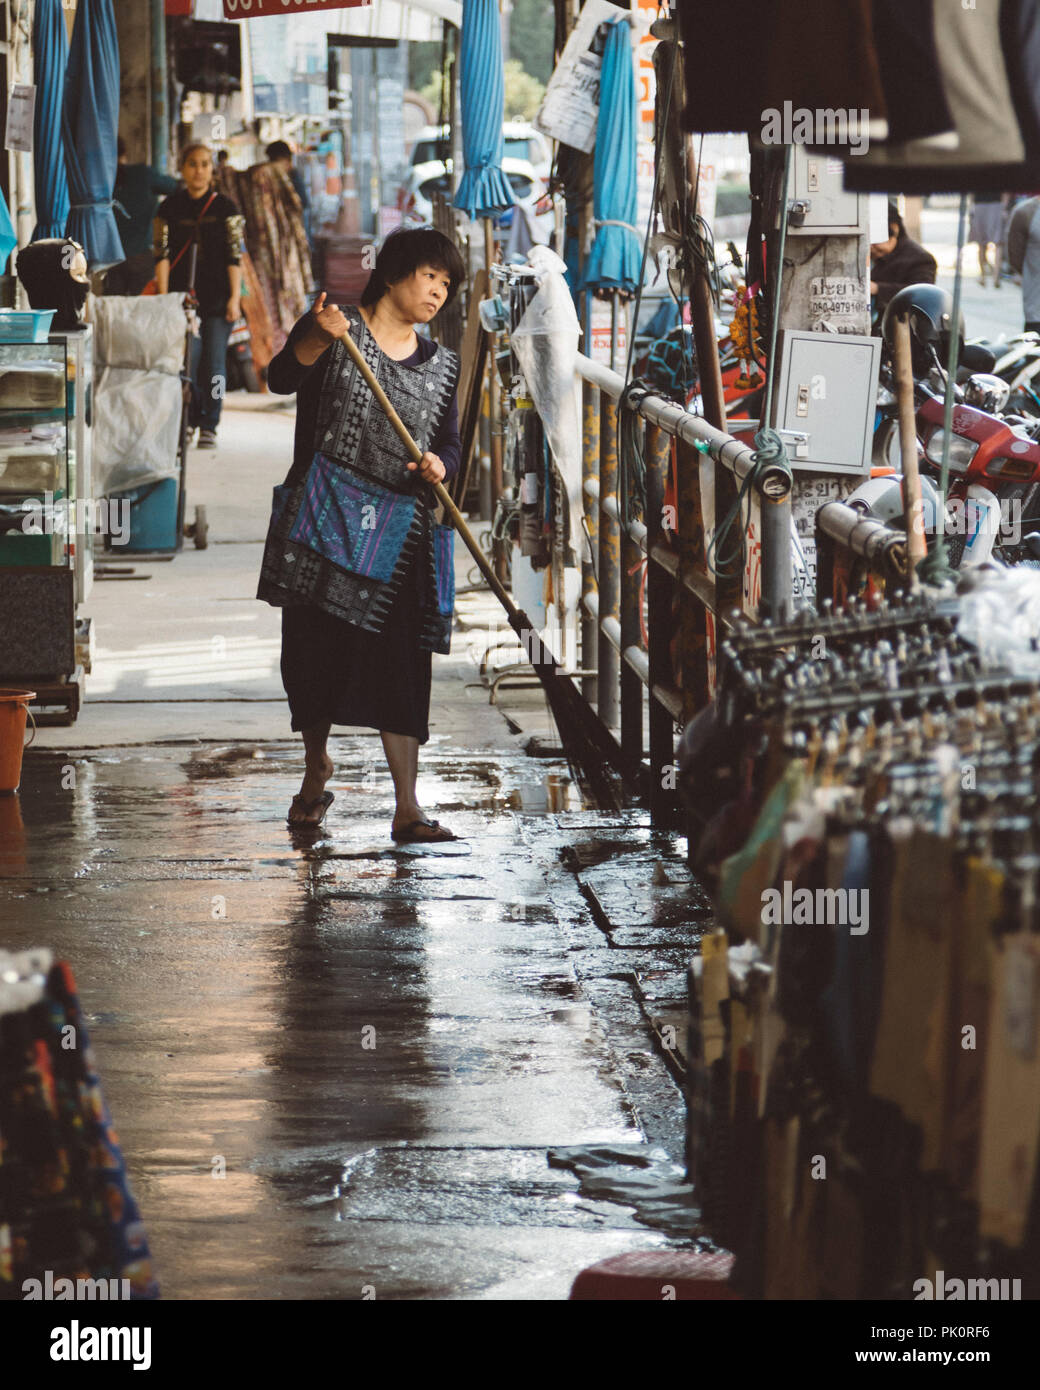 Woman sweeping at warorot market, Chinatown in Chiang Mai, Thailand Stock Photo